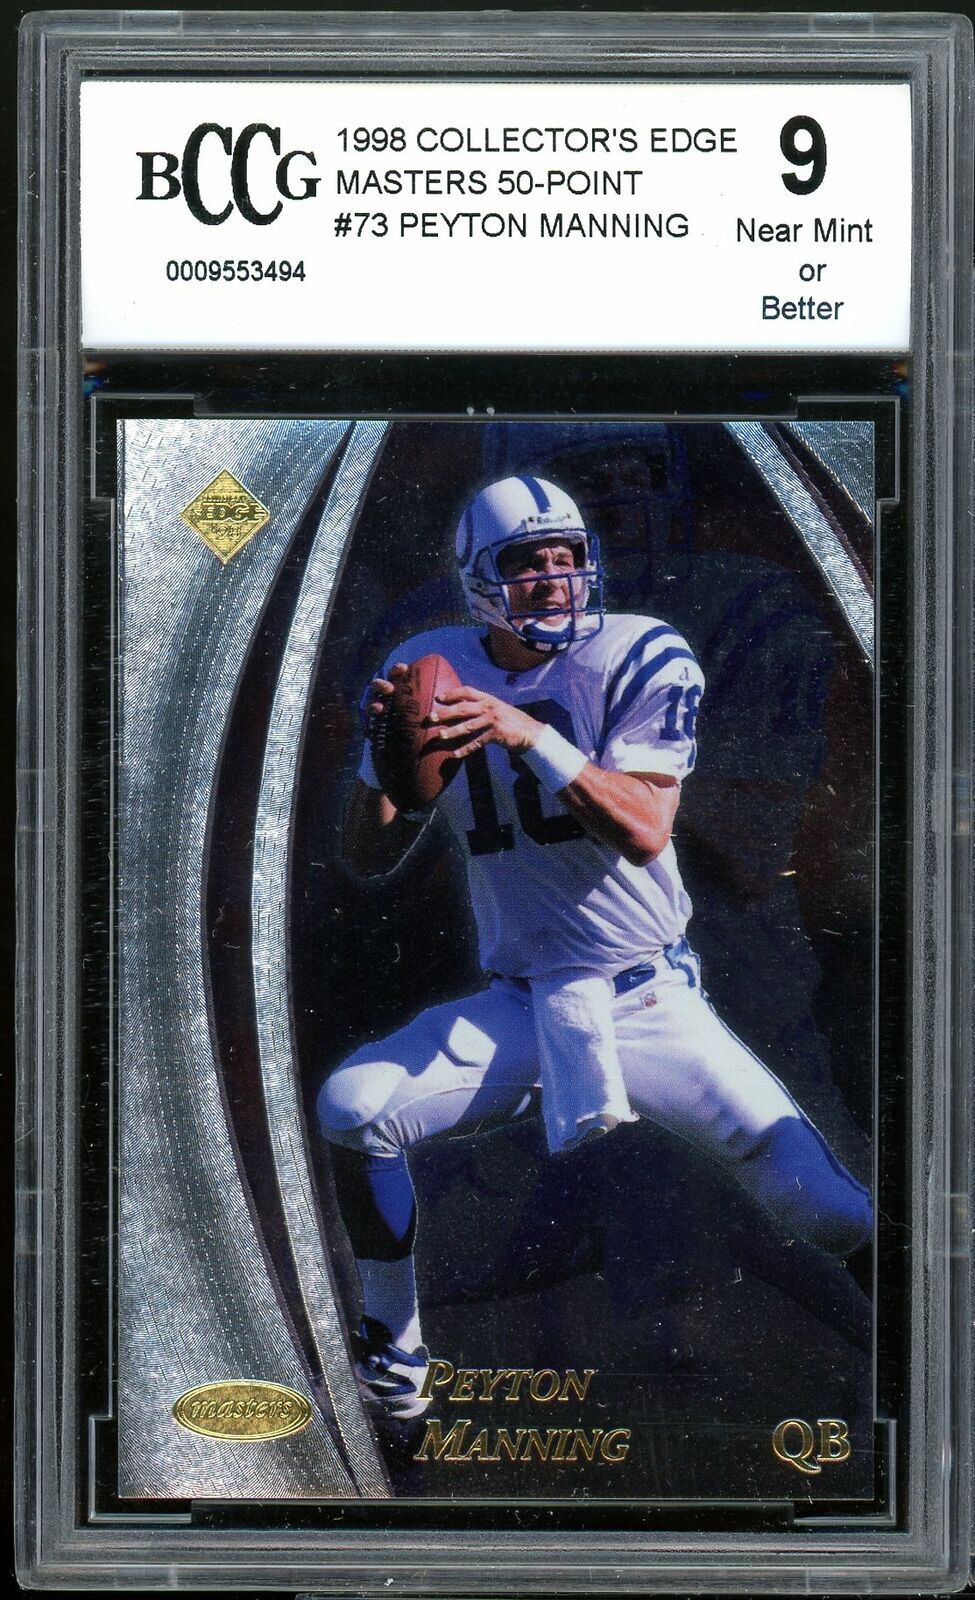 1998 Collector's Edge Masters 50-Point #73 Peyton Manning Rookie BGS BCCG 9 NM+ Image 1